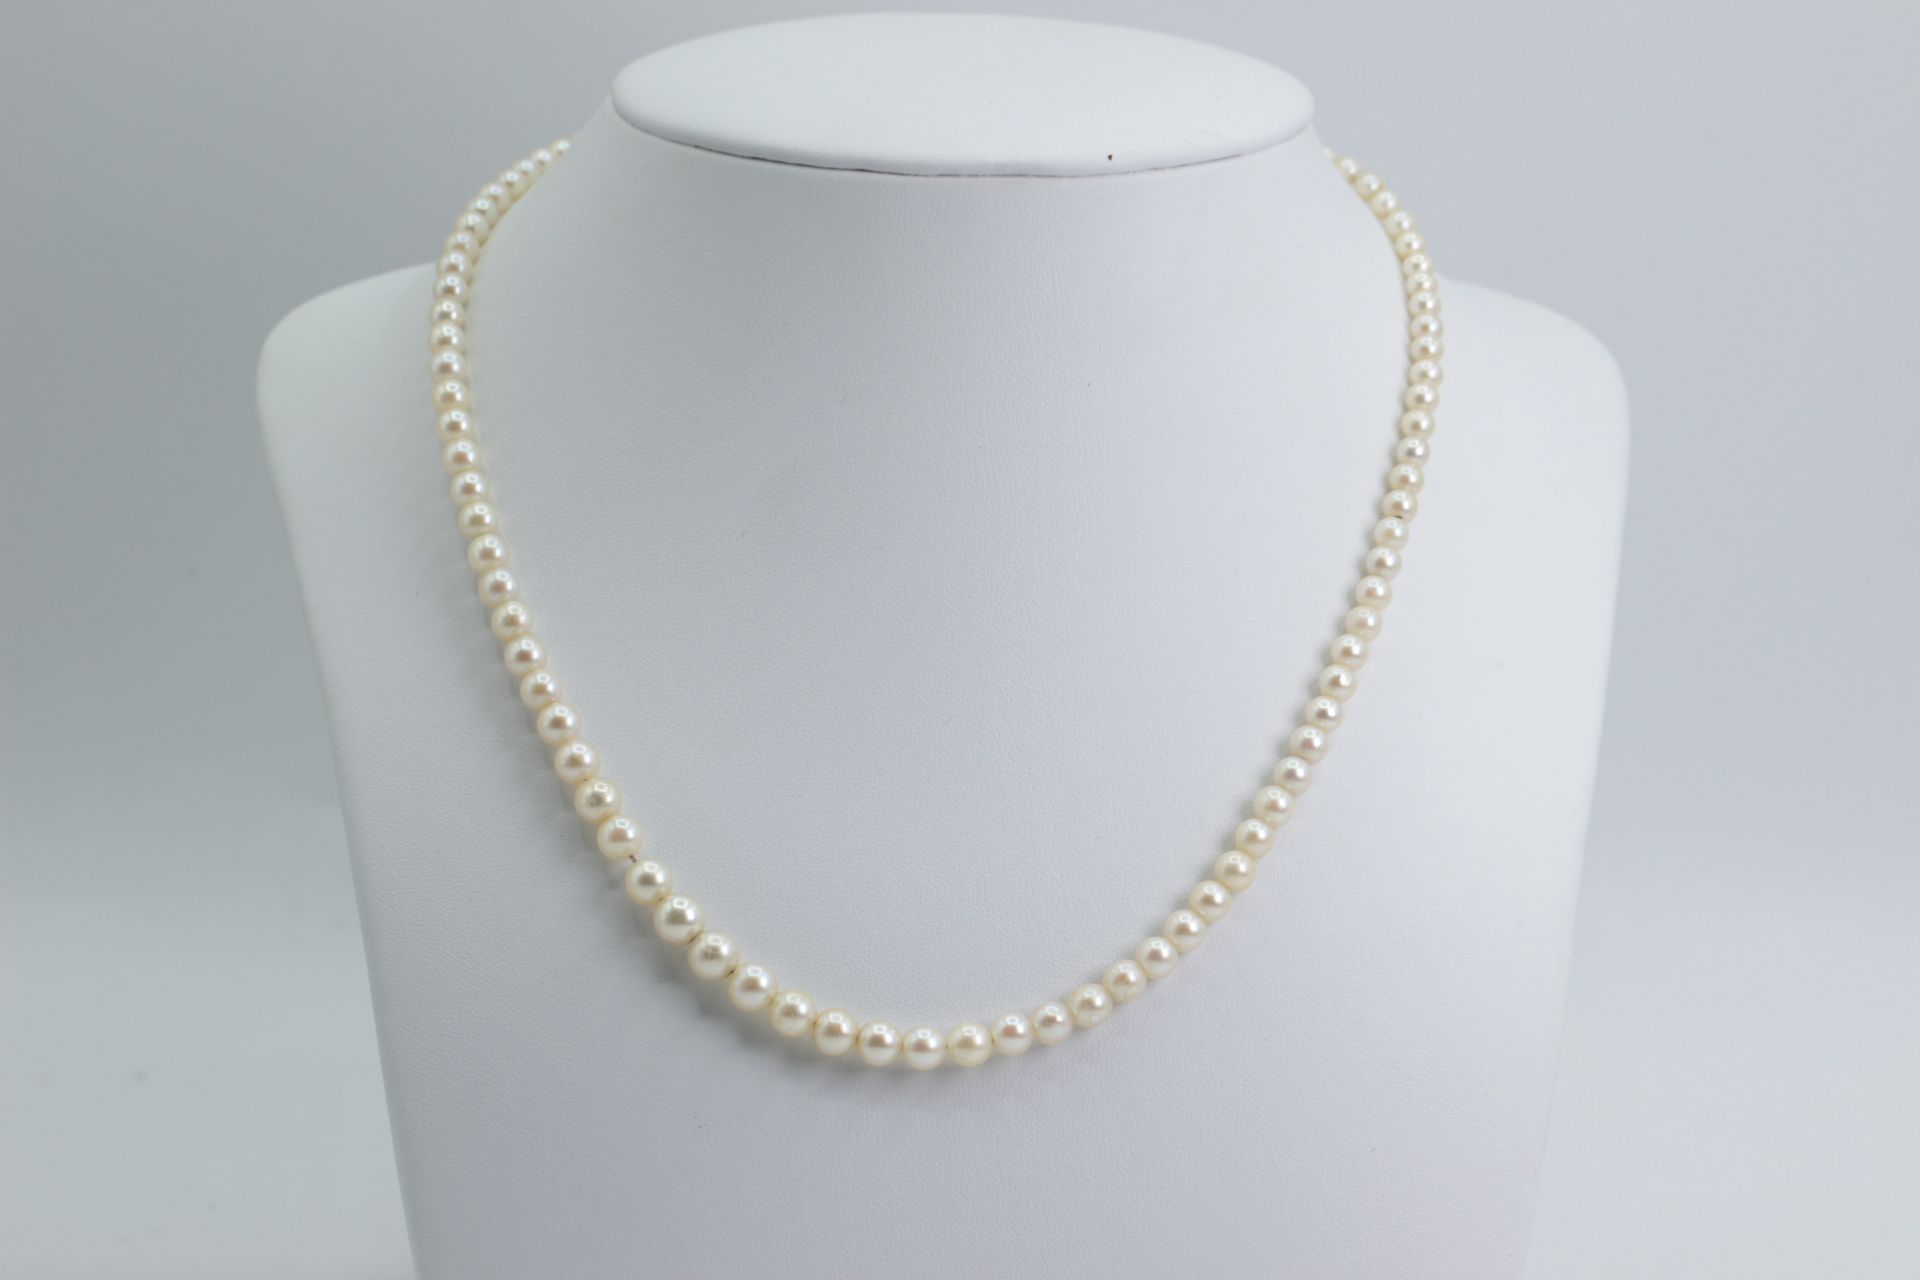 Knotted Pearl Necklace with Silver Clasp 46cm - Image 4 of 4